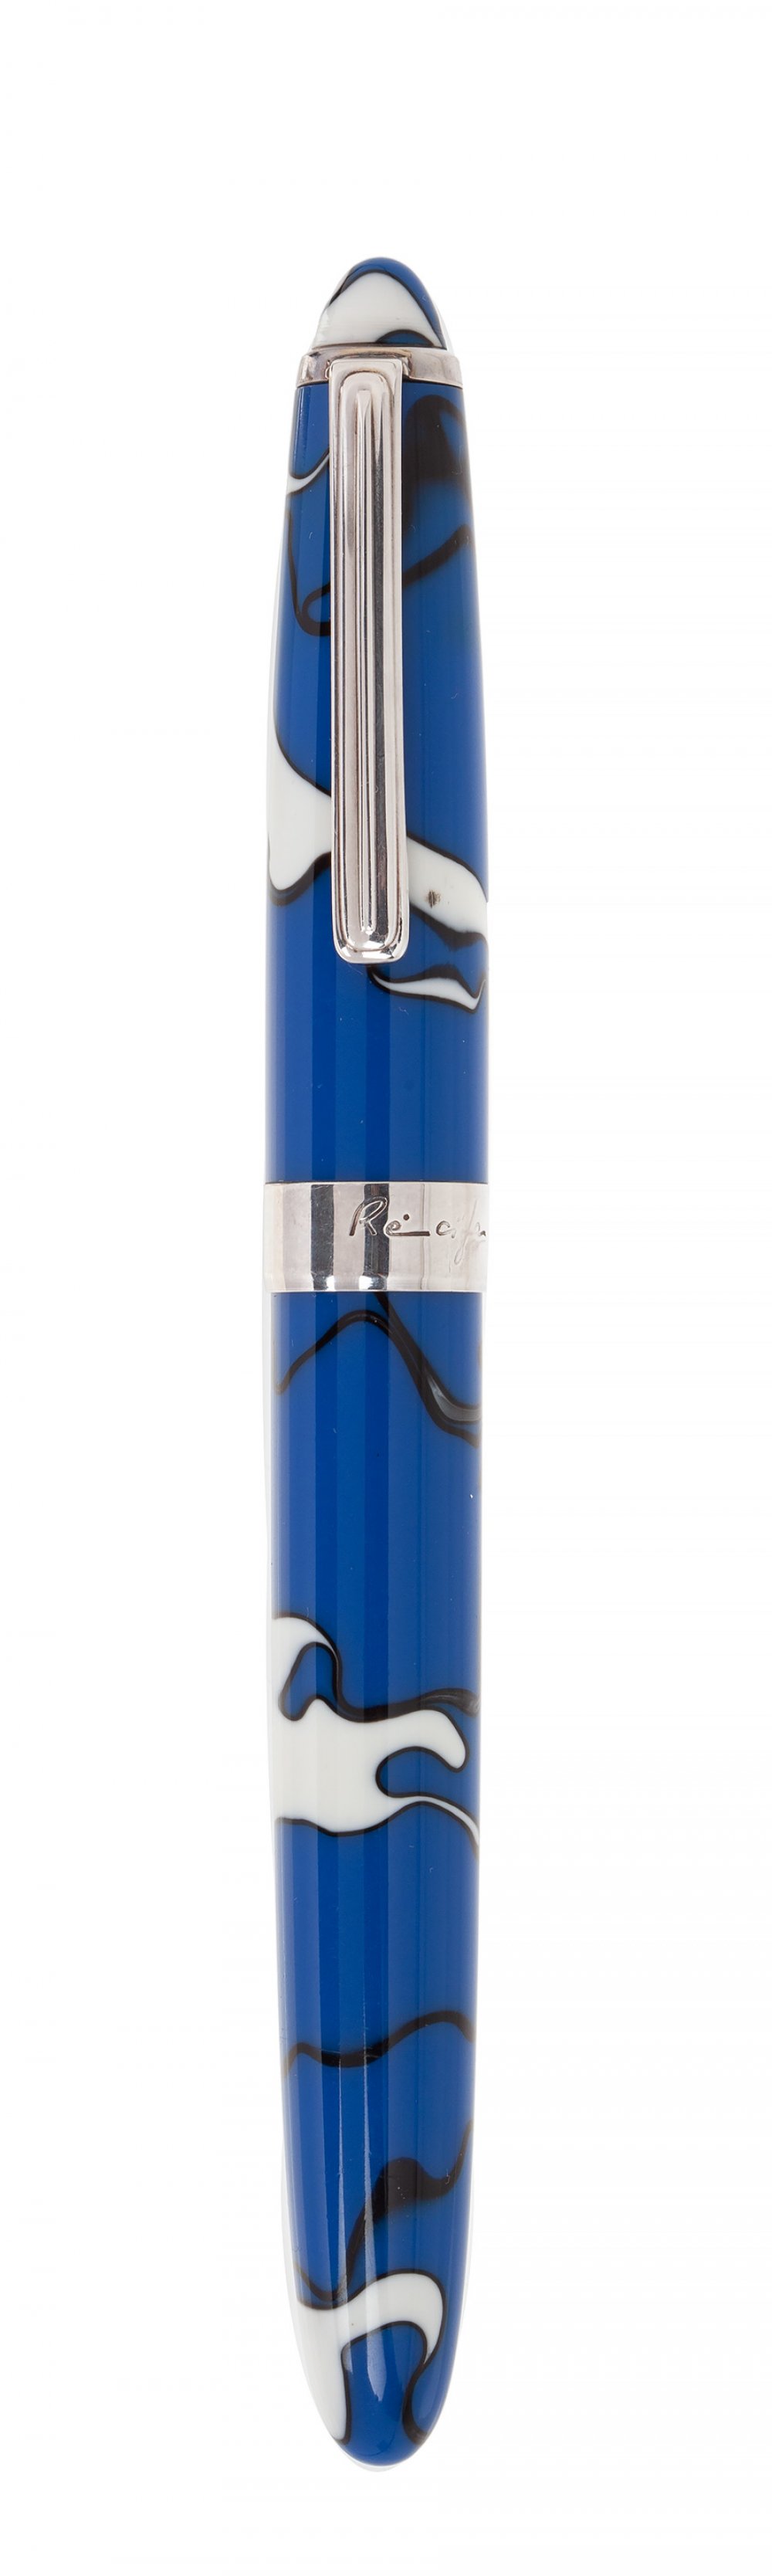 RÉCIFE FOUNTAIN PEN, LIMITED SERIES MYSTIQUE REPLICA SENIOR.Blue and white resin barrel.Nib plated